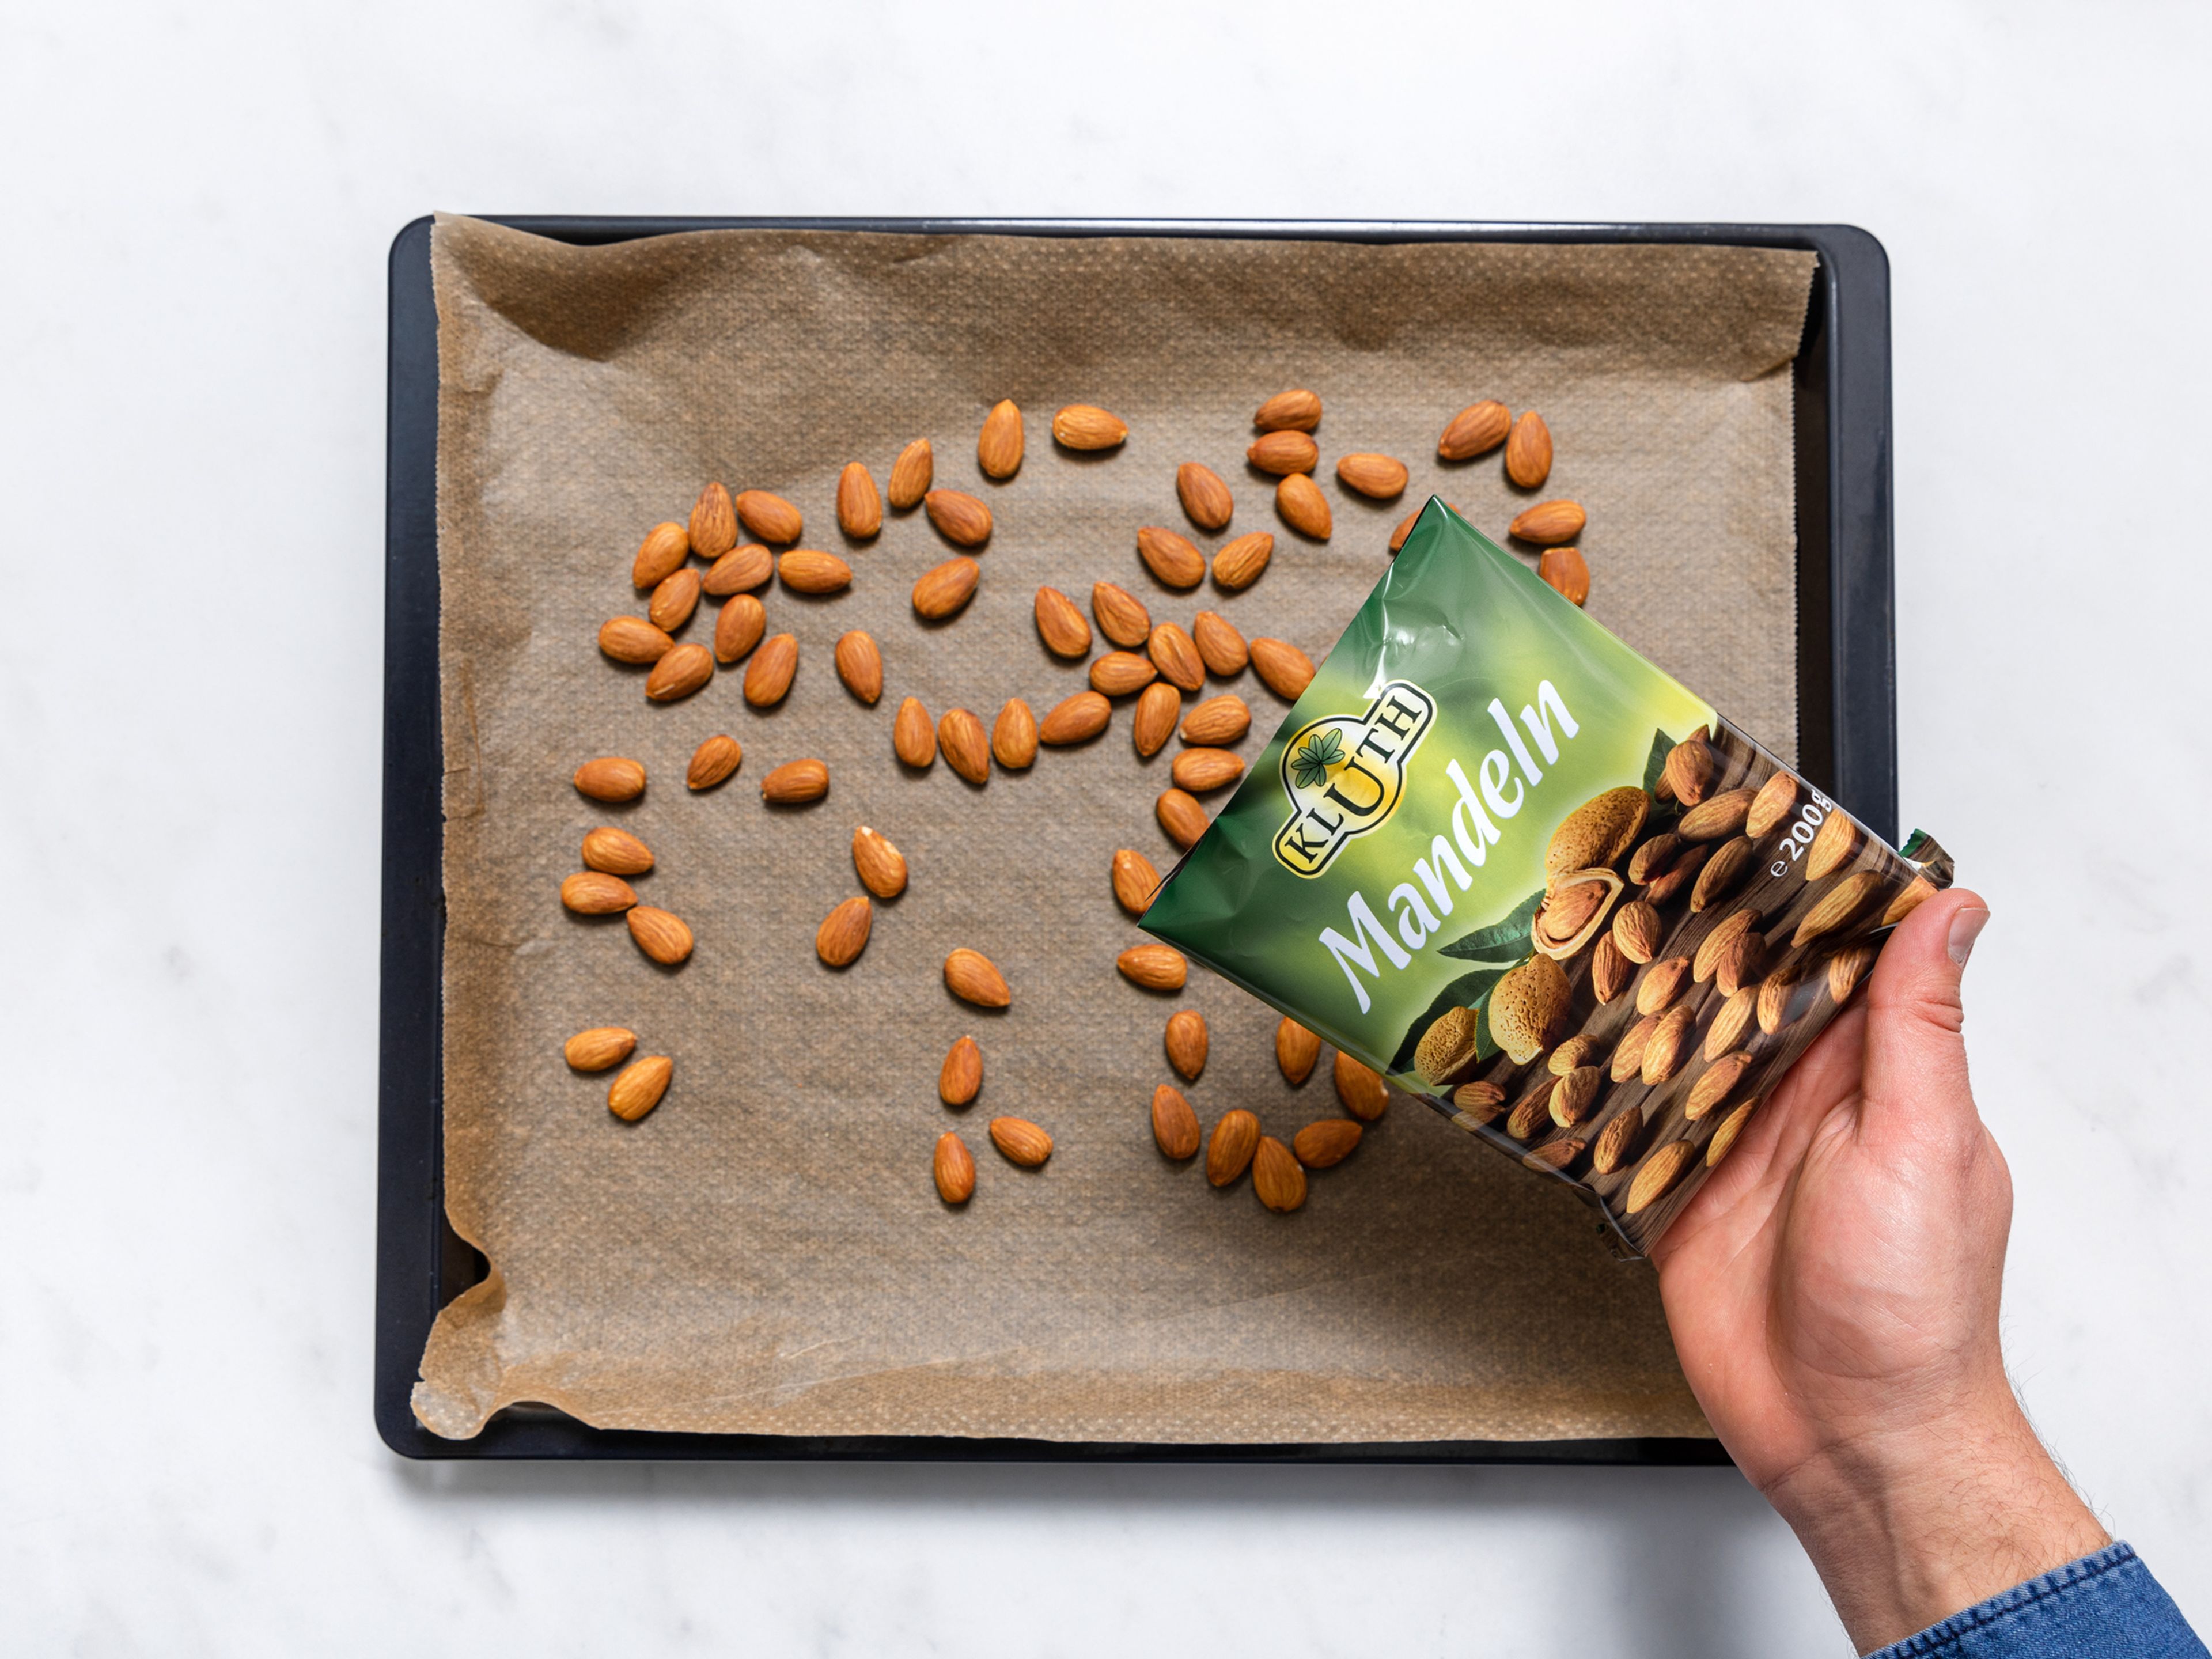 Preheat the oven to 180ºC/356ºF. Spread almonds on a baking sheet and roast for approx. 8 min., or until golden brown. Remove from the oven and set aside to cool. Once cooled, add them to a food processor and blitz until powdery.